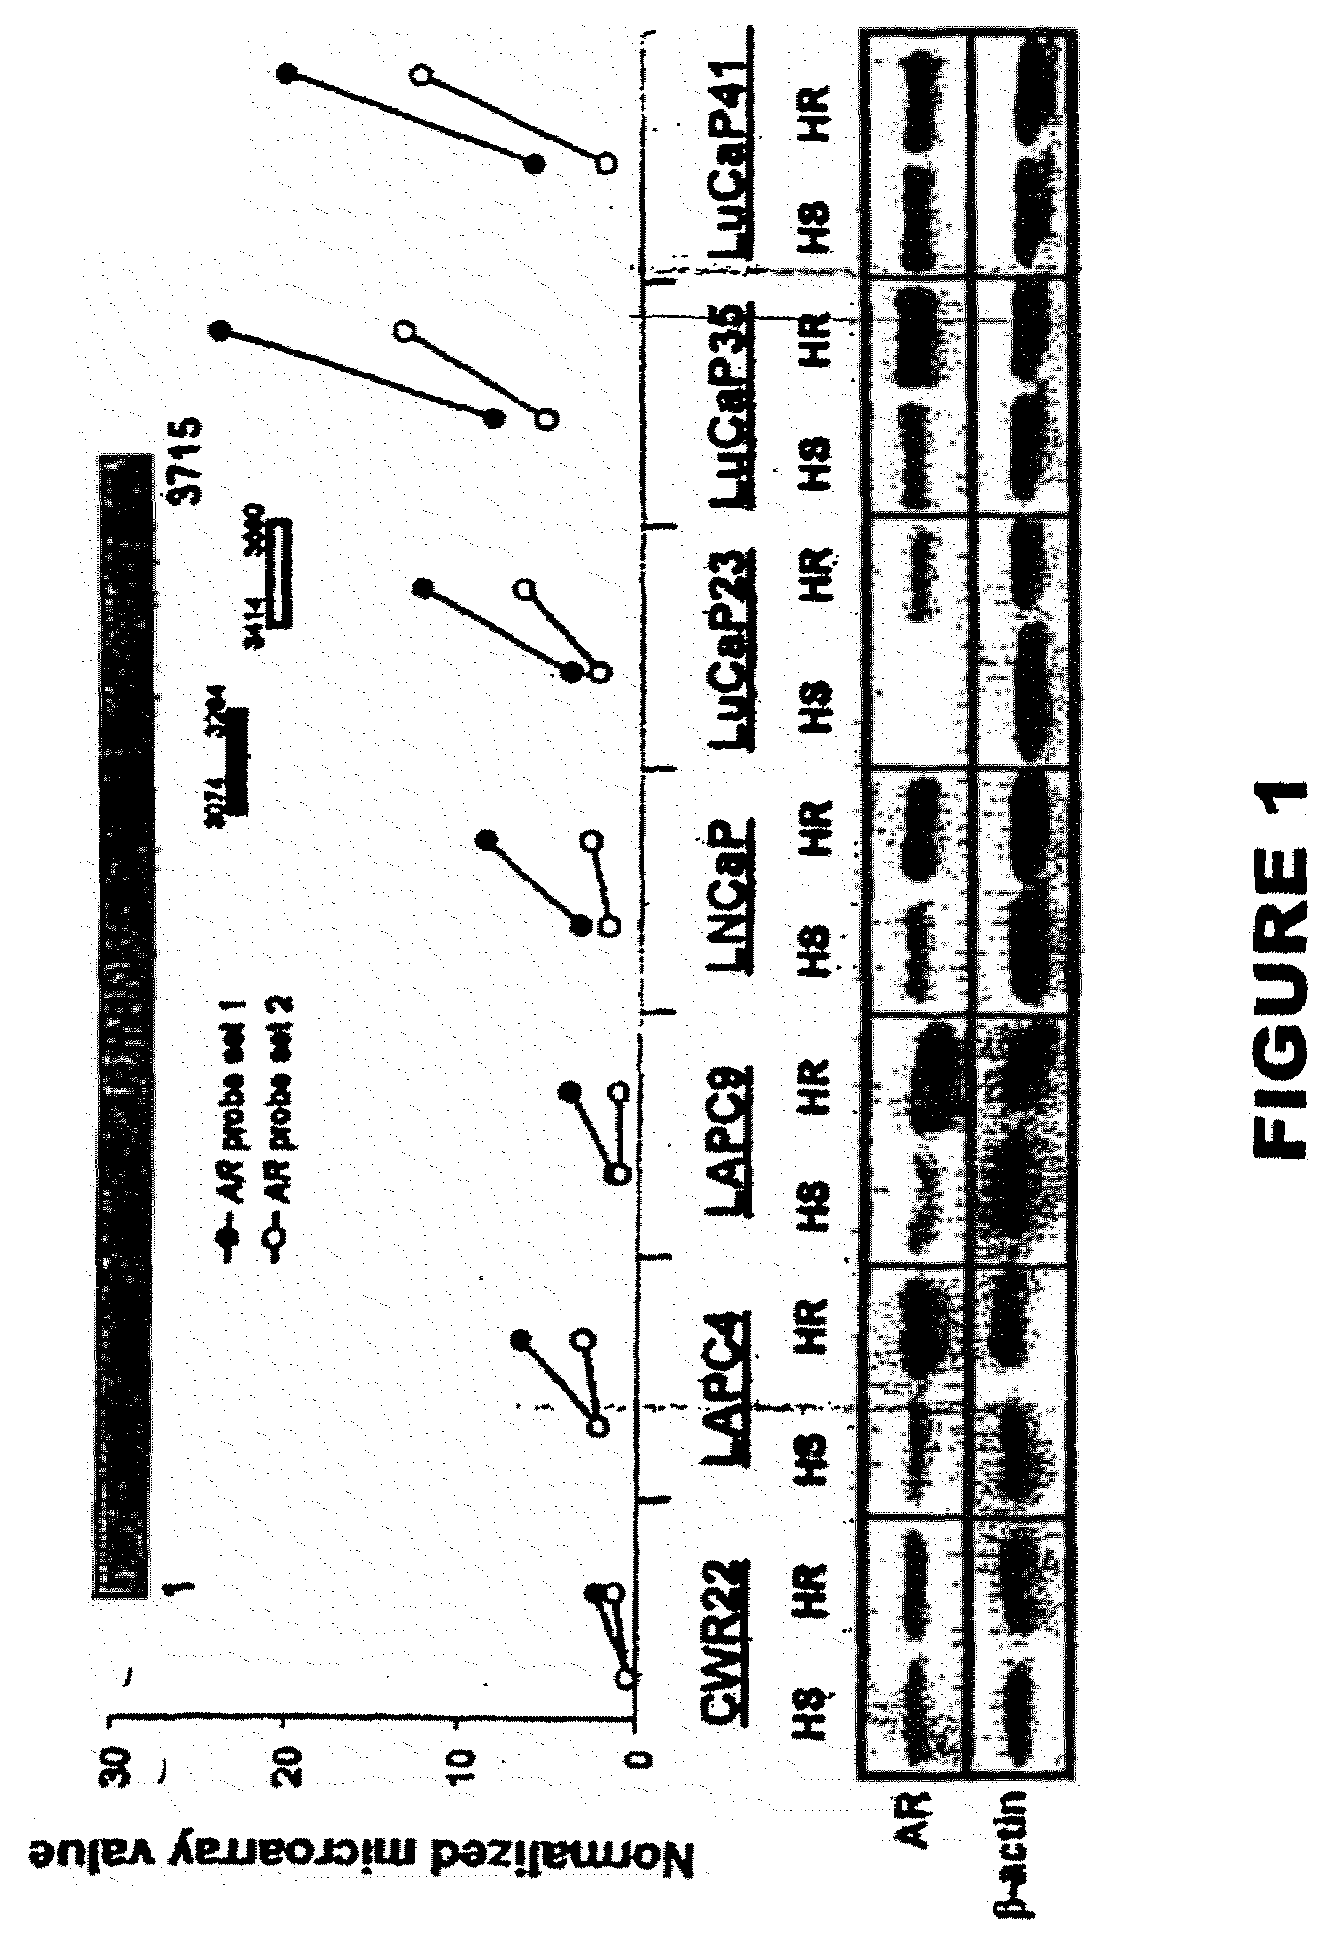 Methods and materials for assessing prostate cancer therapies and compounds